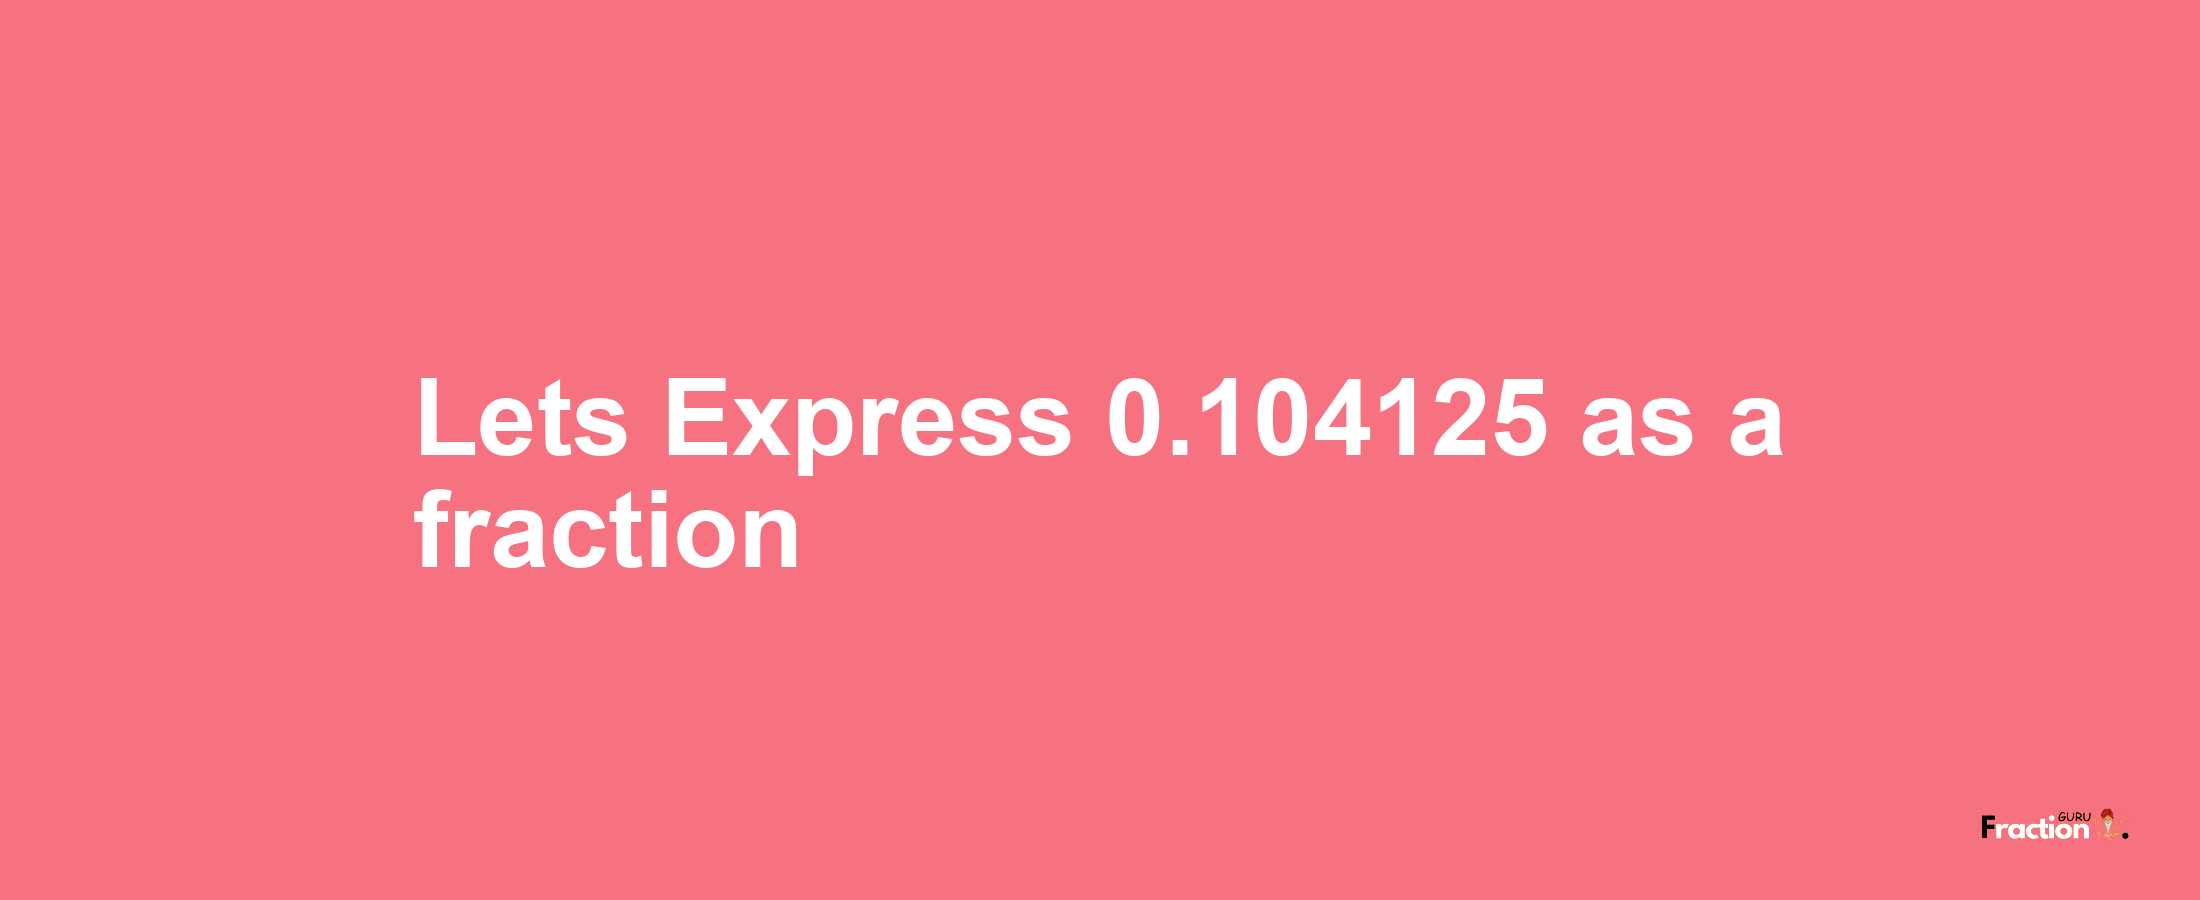 Lets Express 0.104125 as afraction